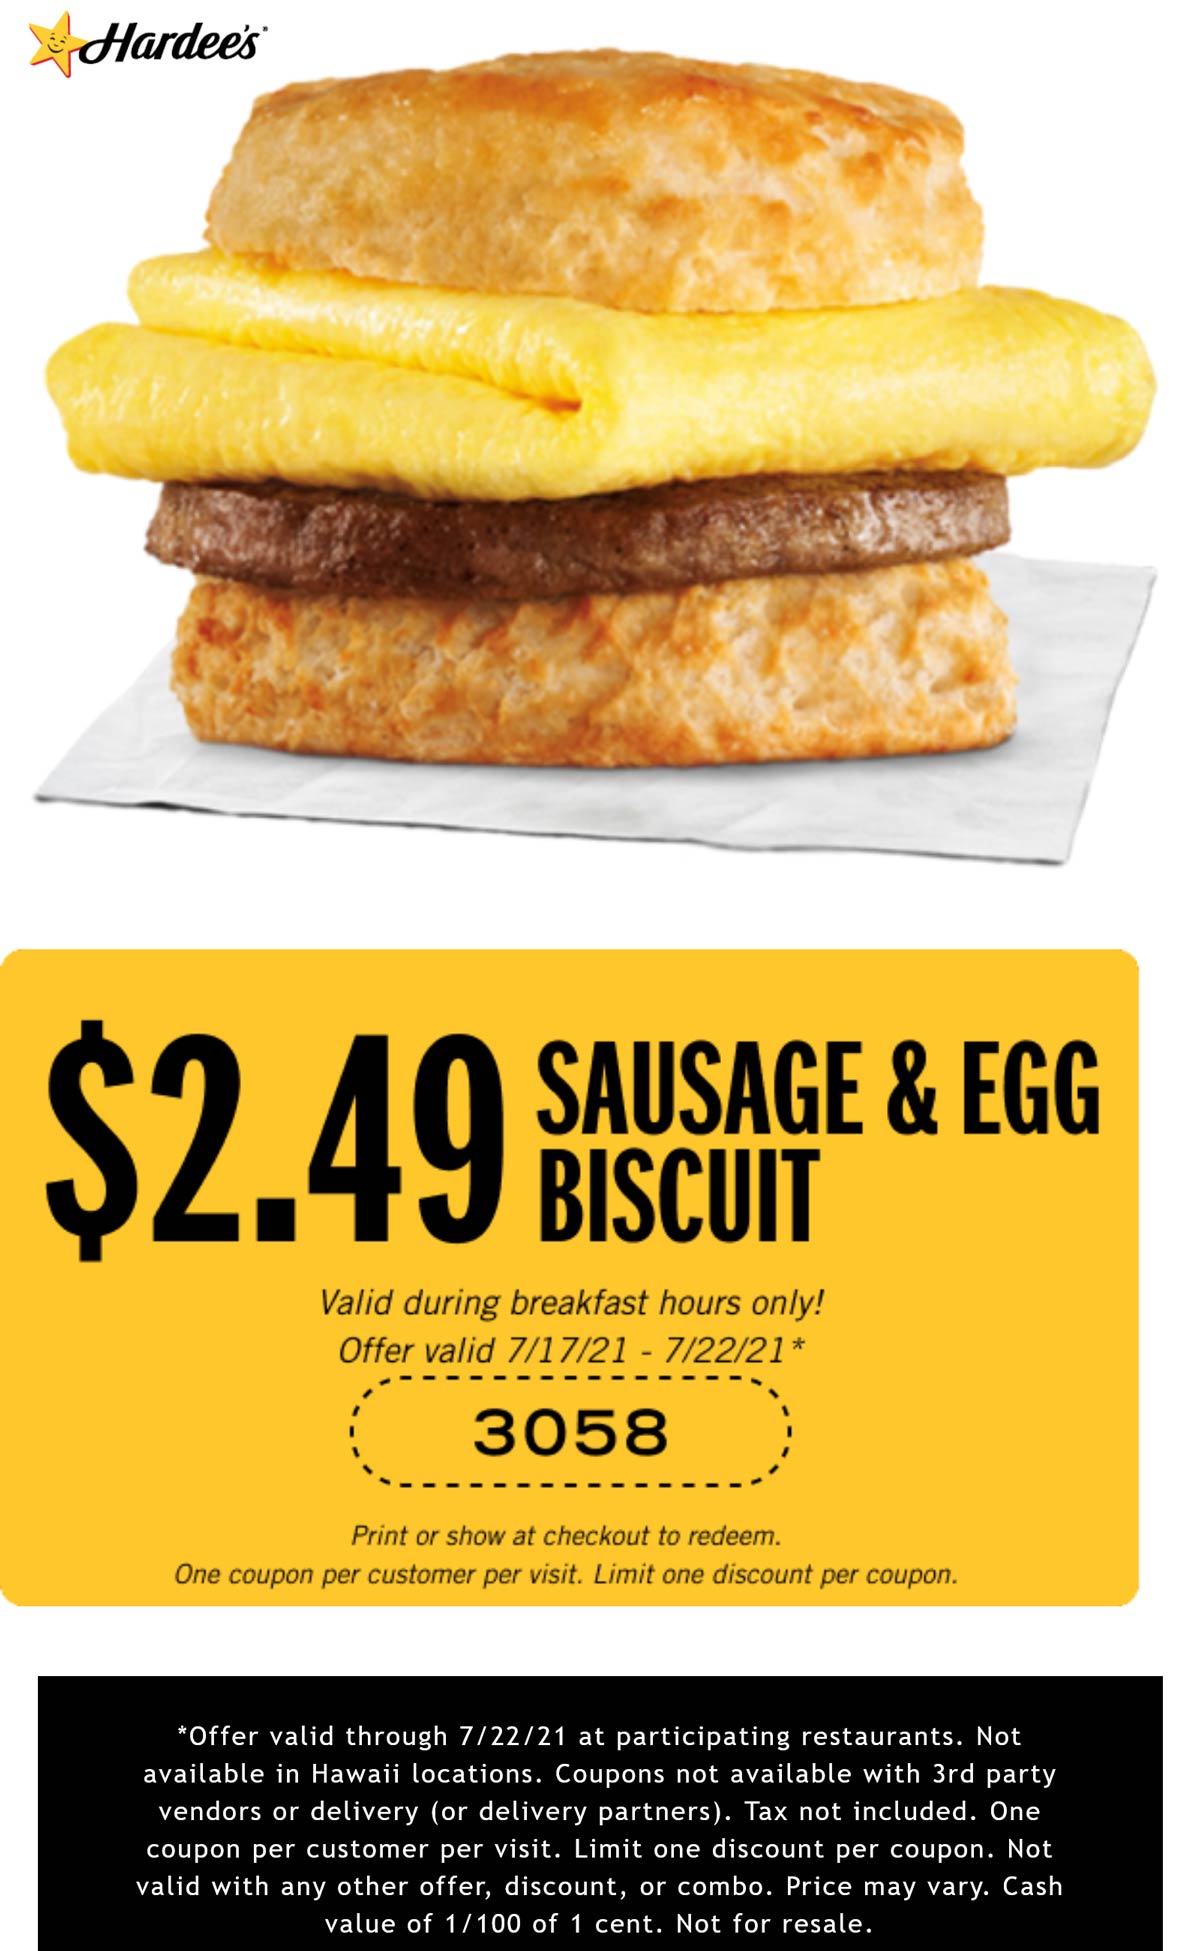 Sausage & egg breakfast biscuit for 2.49 at Hardees hardees The